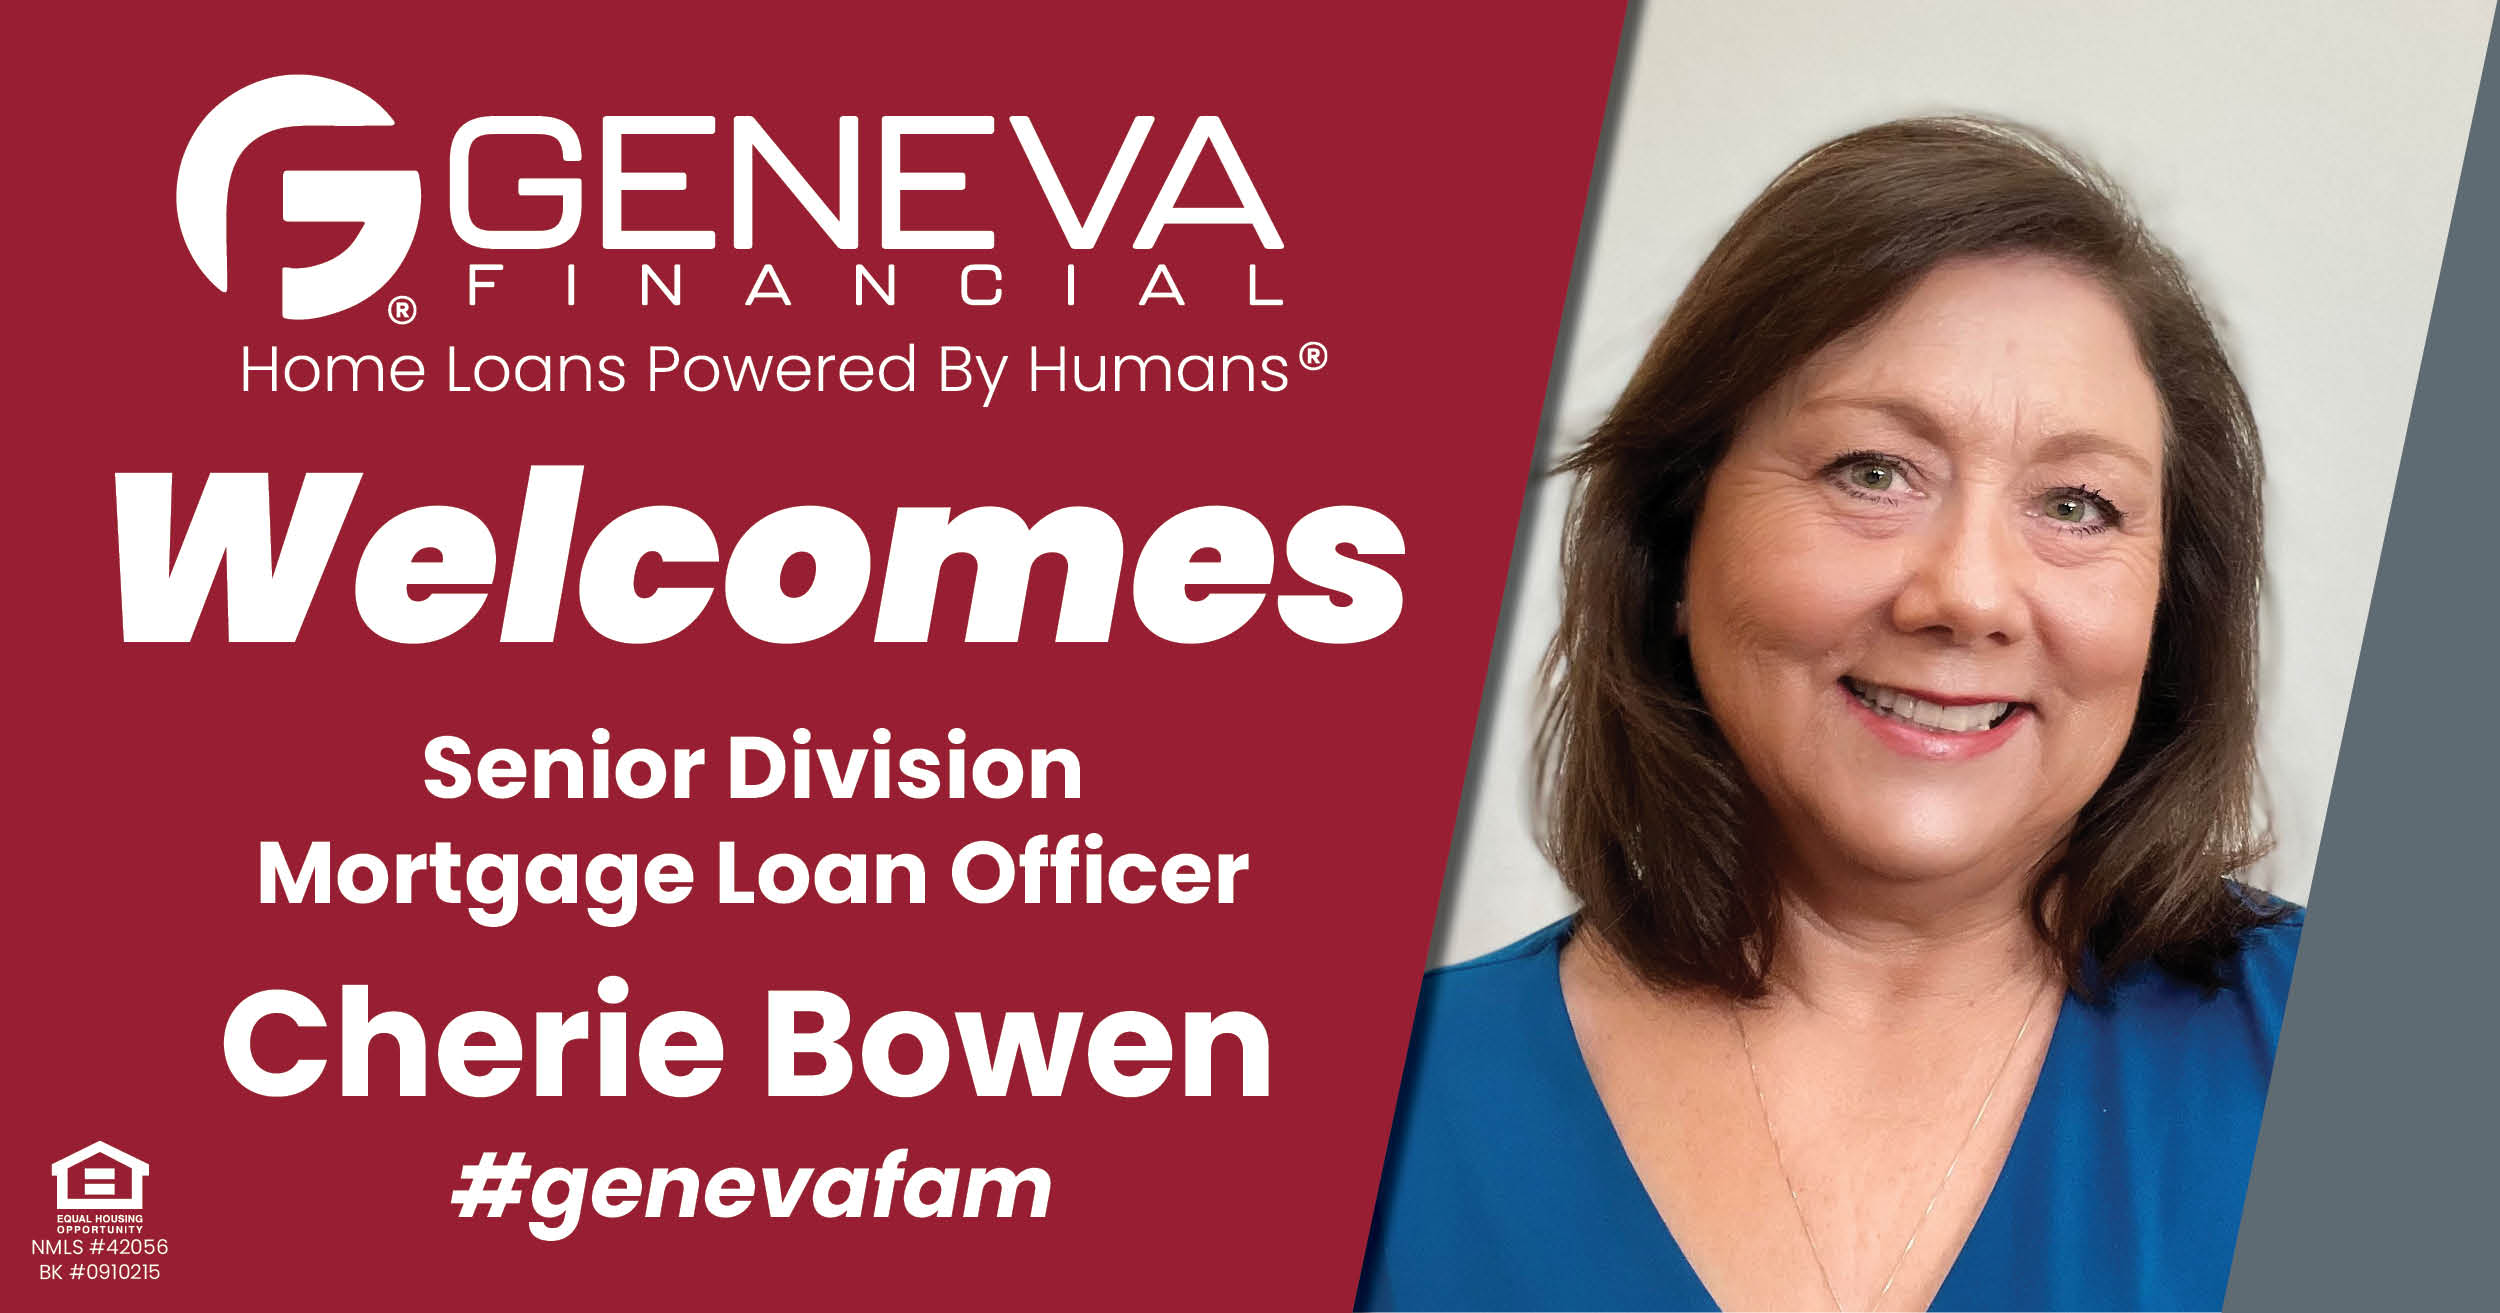 Geneva Financial Welcomes New Senior Division Loan Officer Cherie Bowen to Weatherford, TX – Home Loans Powered by Humans®.